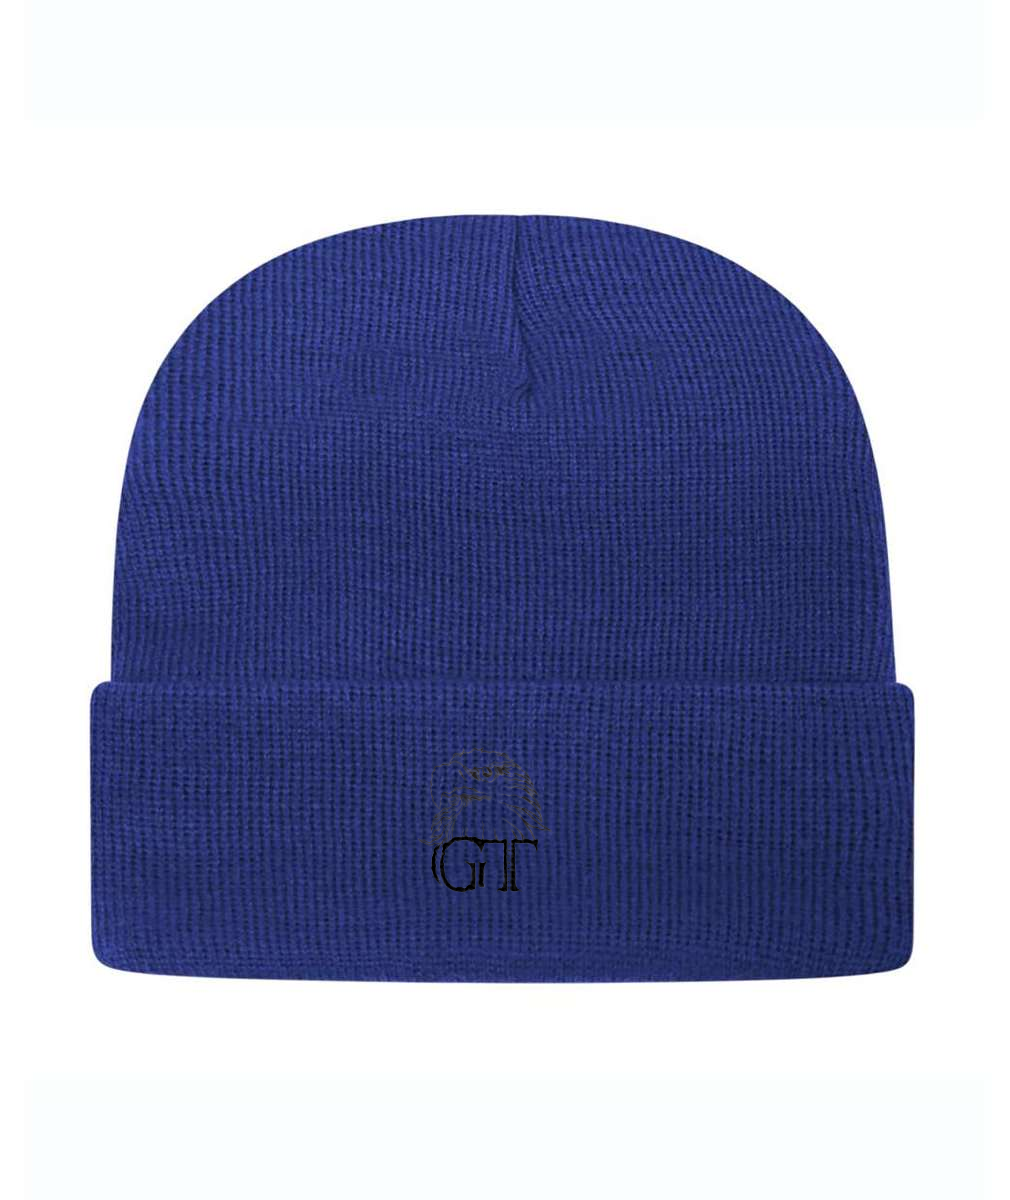 GT Patriot Embroidered Knit Beanie